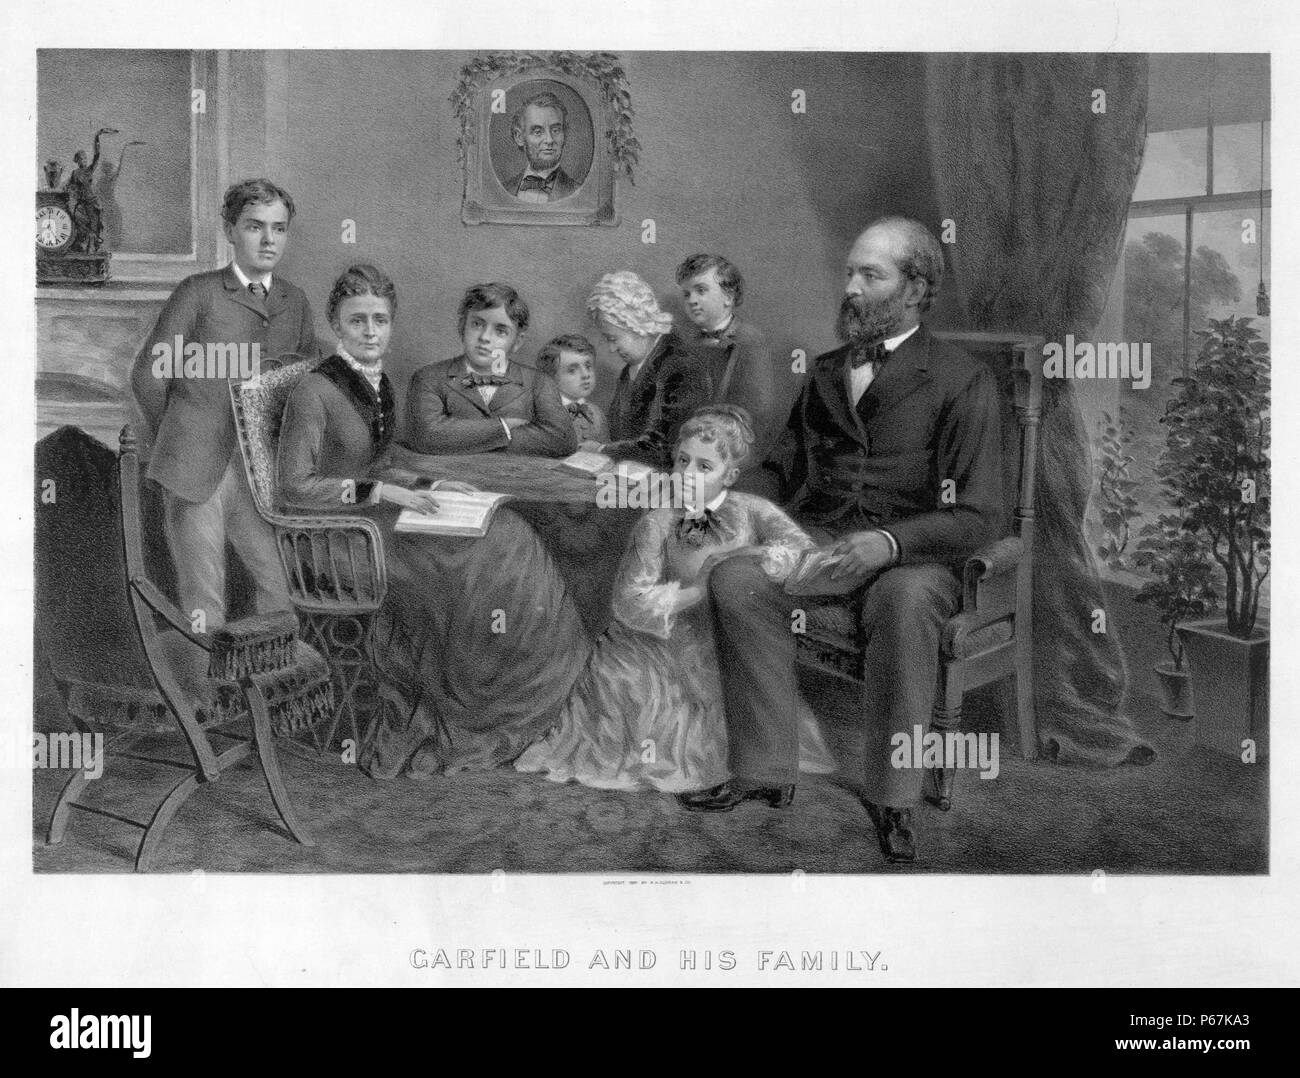 President James Garfield with his family. Garfield was the 20th President of the United States.  During his time in office, he reintroduced Presidential authority over Senatorial authority when it came to executive appointments. Stock Photo